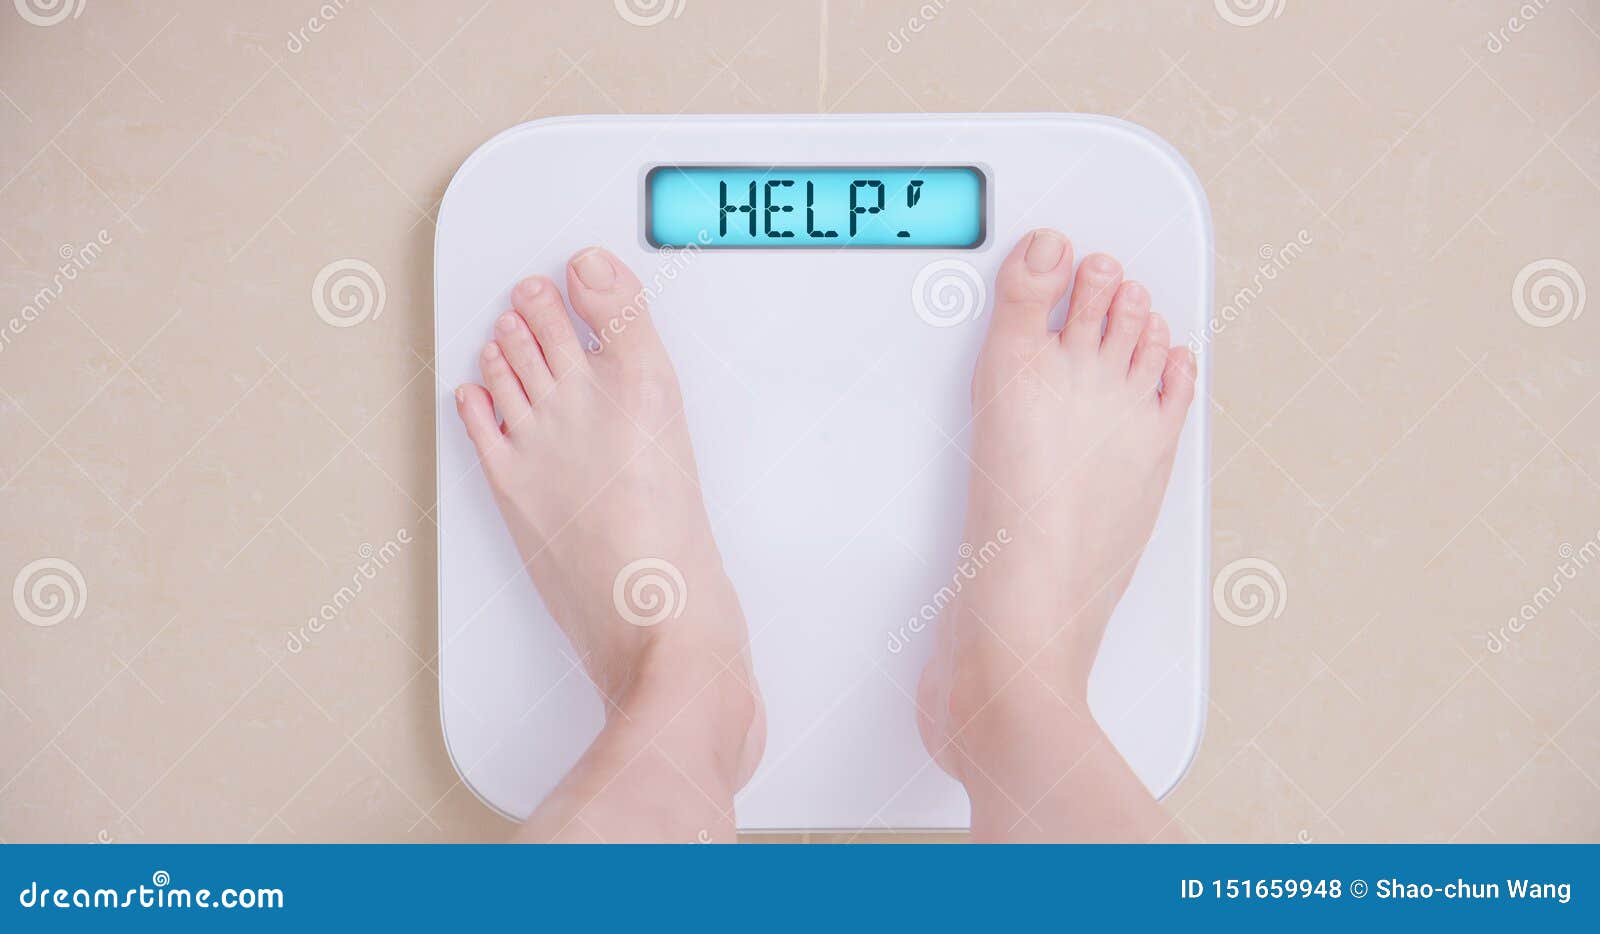 lose weight concept with scale